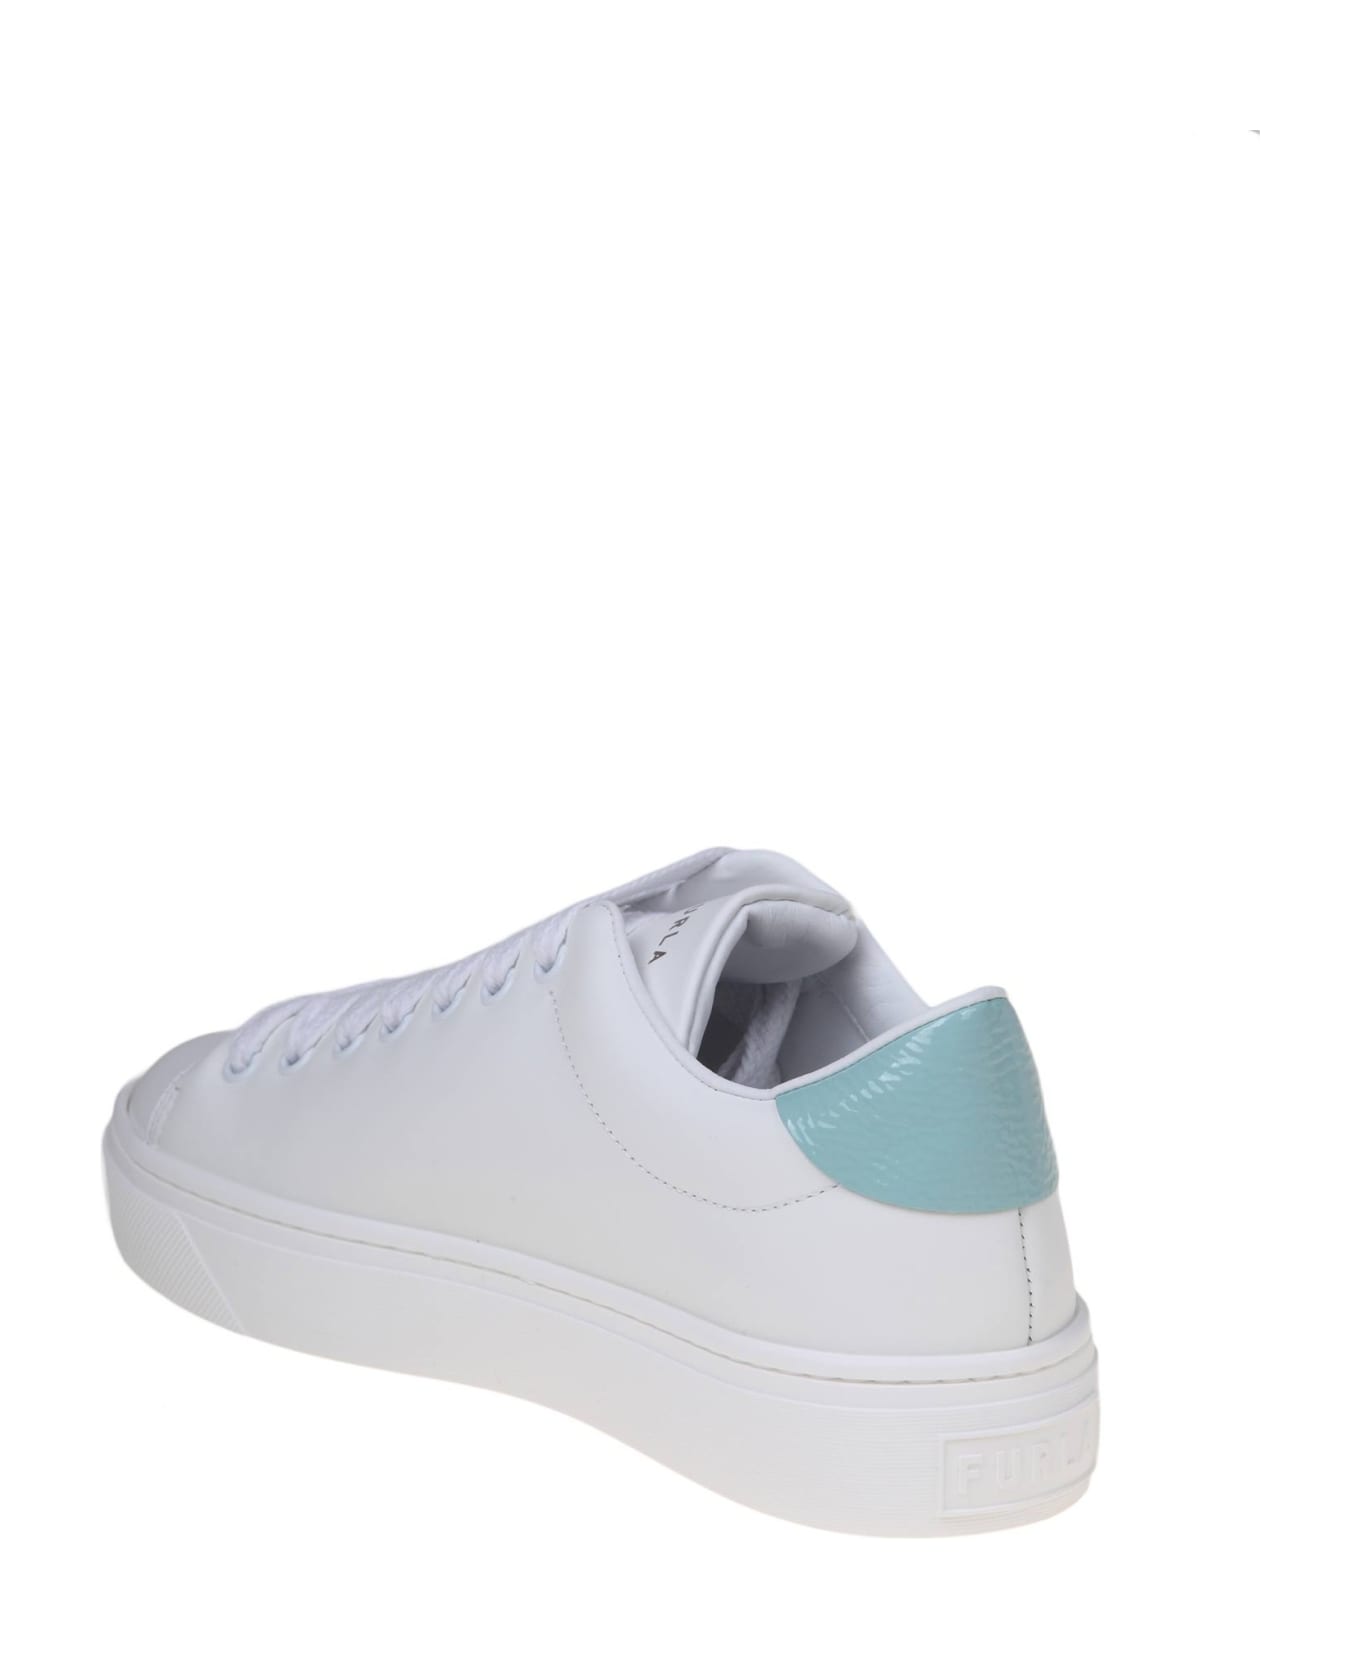 Furla Joy Lace Up Sneakers In White Leather - TALC/VERGOLD